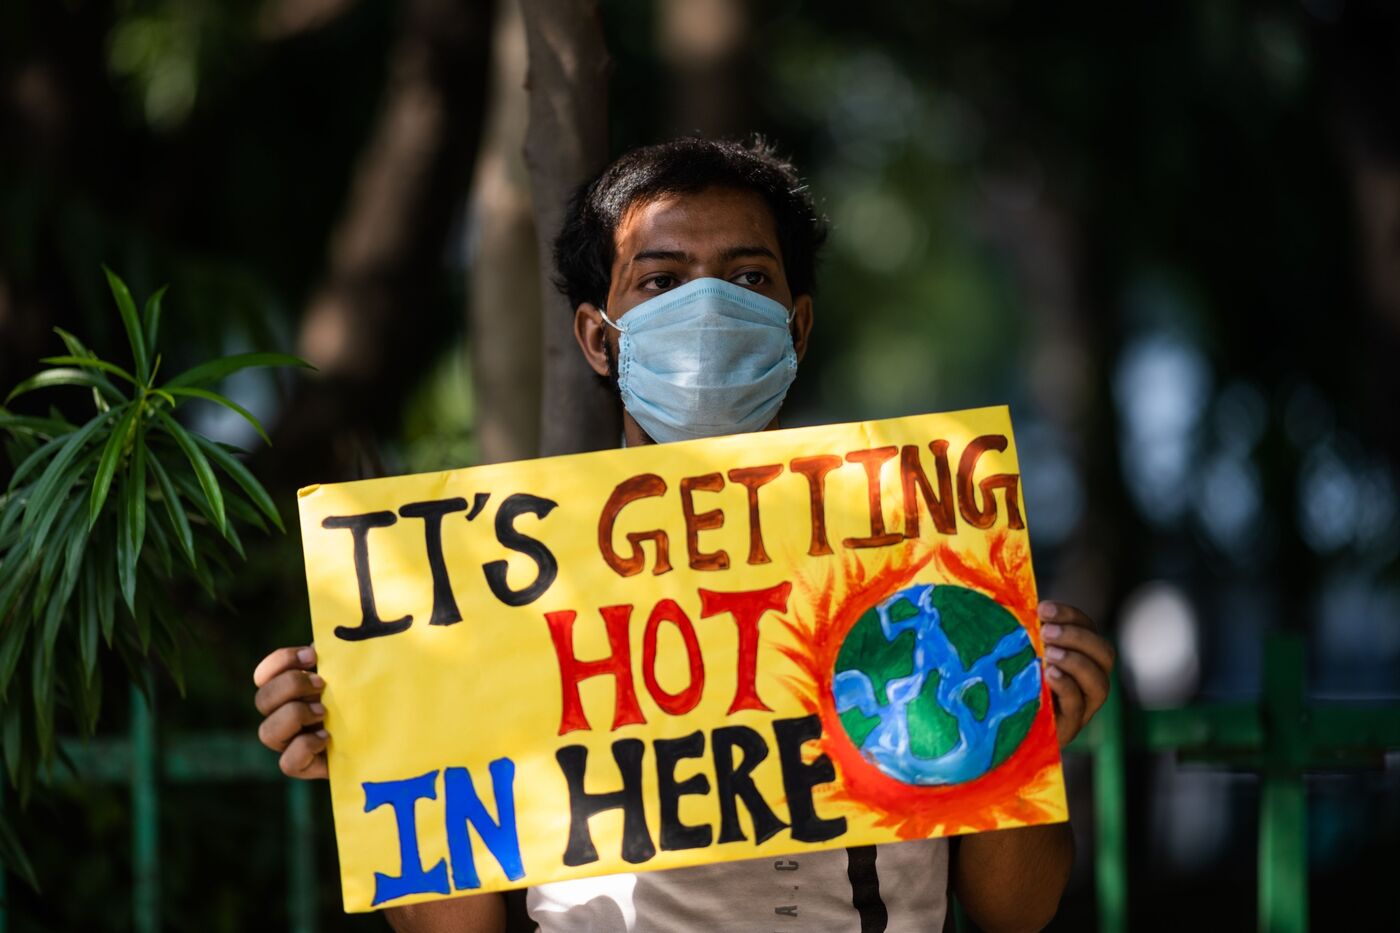 A protestor in India protesting for climate change and advocating for renewable energy.